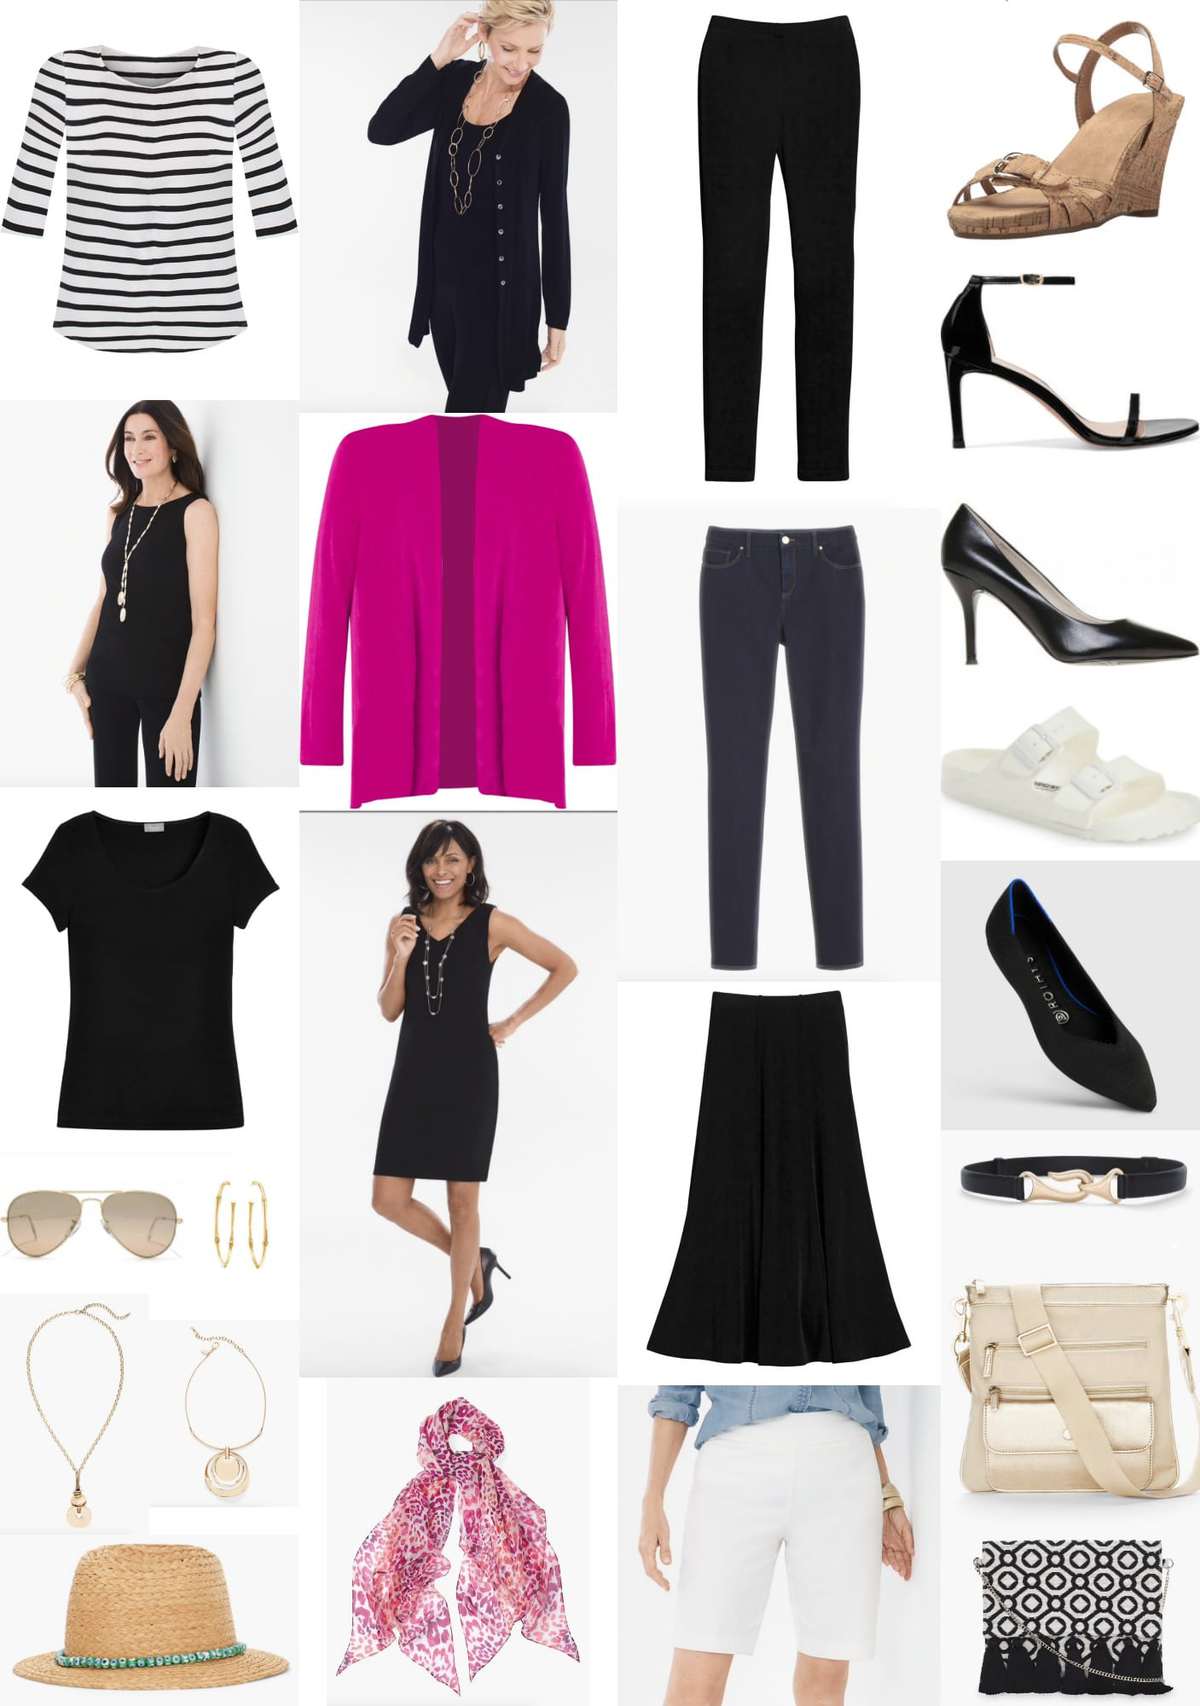 Real-Life Capsule Wardrobe: Chico’s Travelers Collection